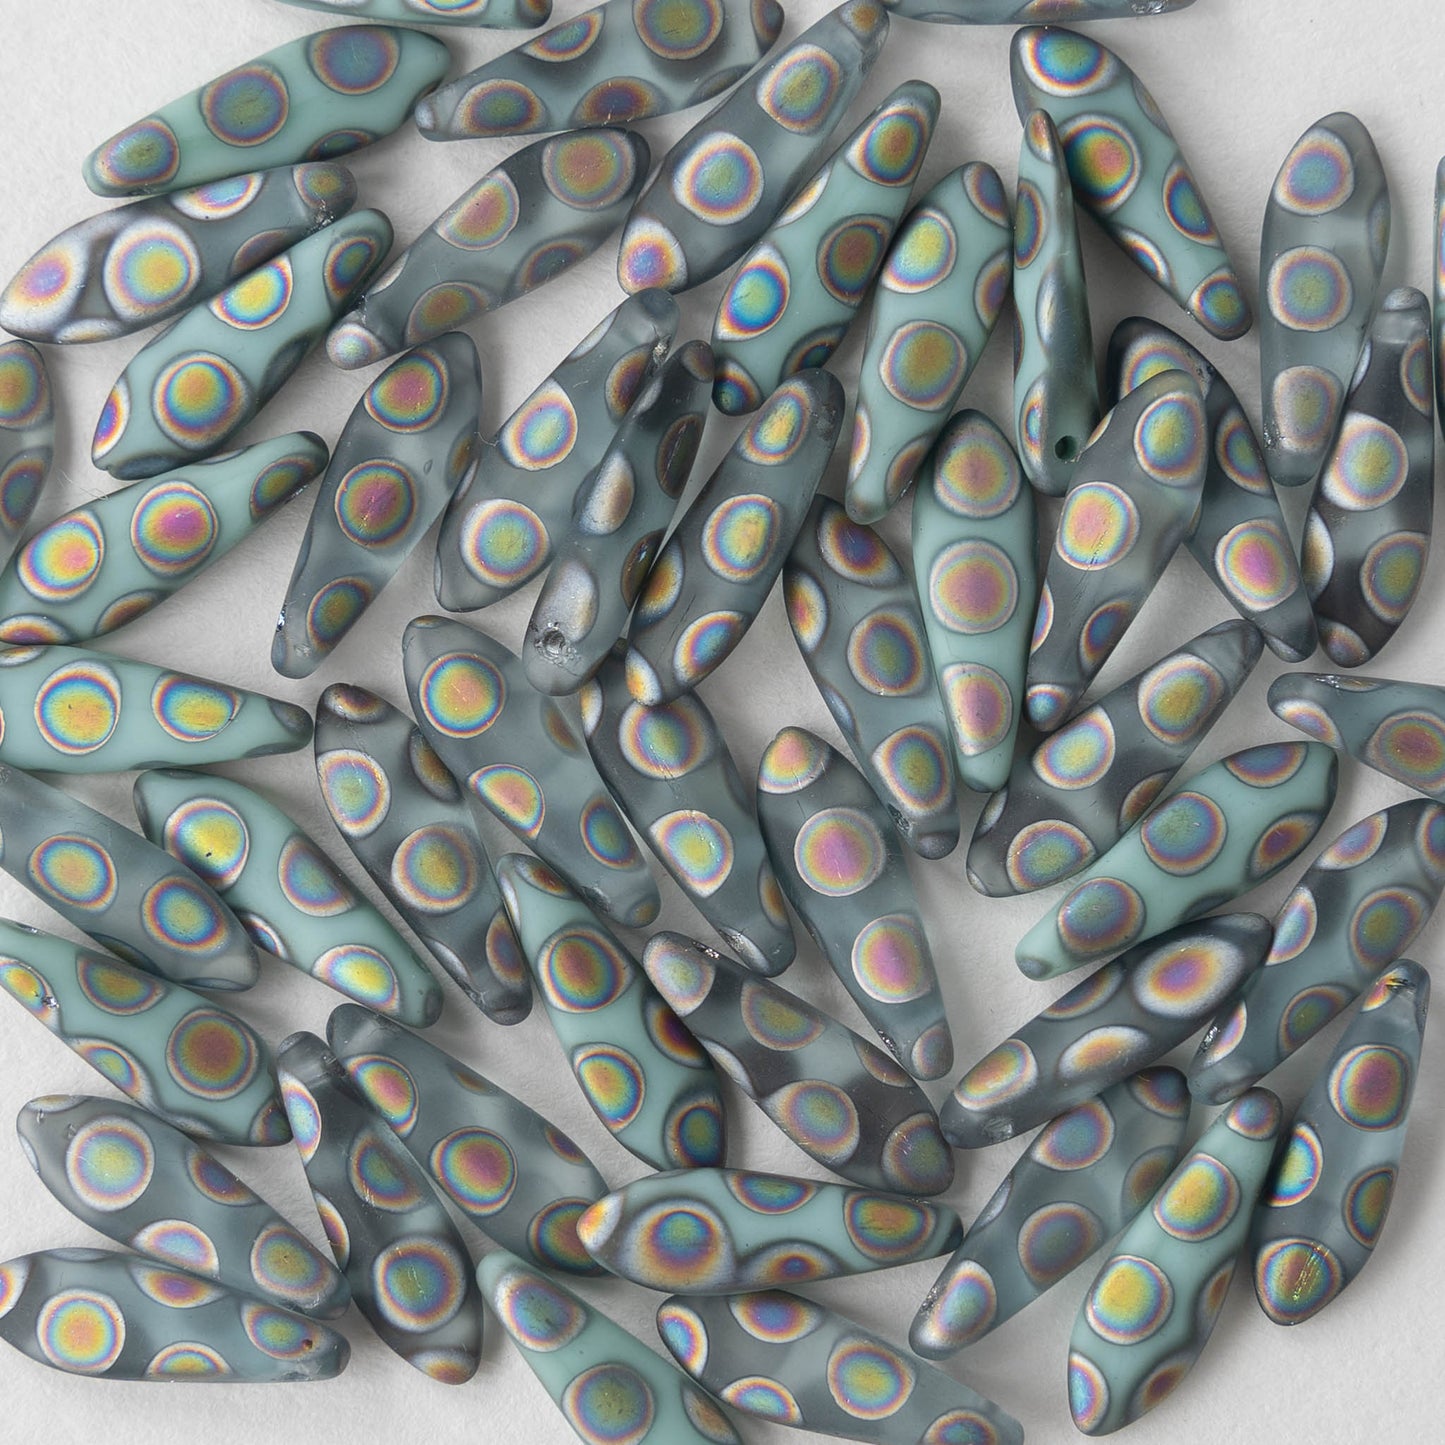 Load image into Gallery viewer, 16mm Dagger Beads - Seafoam Peacock - 50 beads
